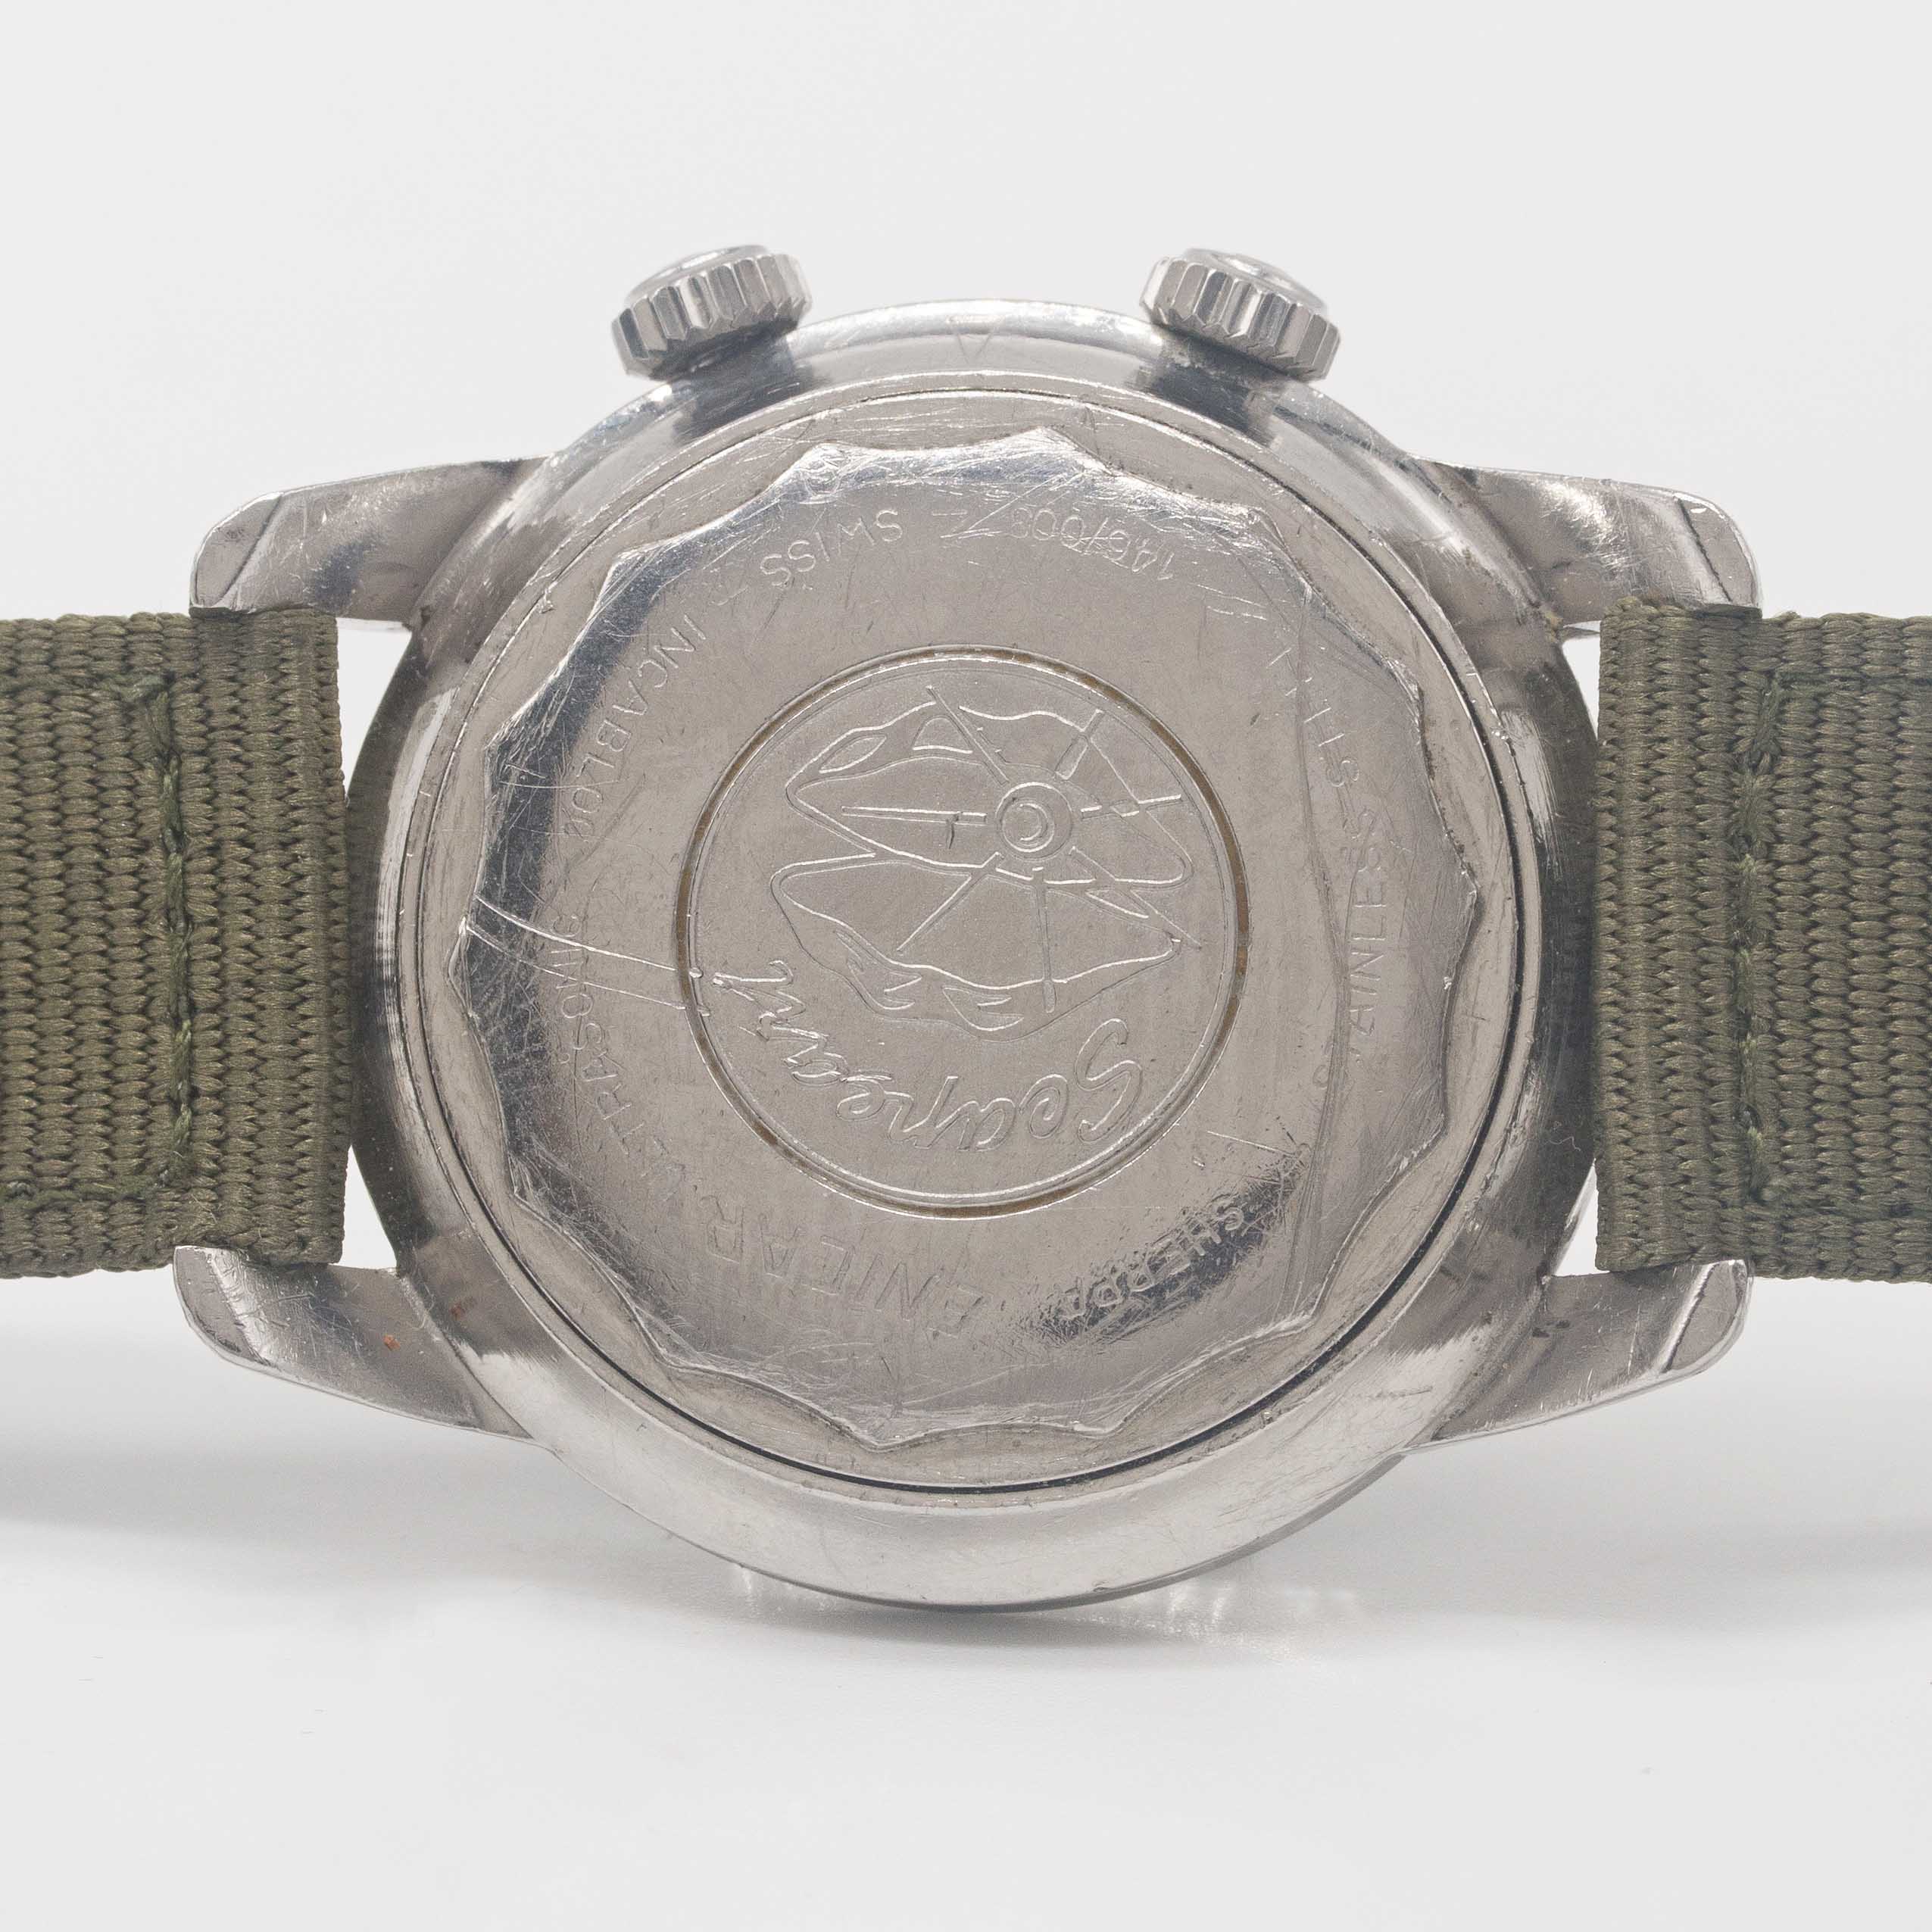 A GENTLEMAN'S STAINLESS STEEL ENICAR SHERPA SUPER JET GMT WRIST WATCH CIRCA 1960s, REF. 146/003 WITH - Image 6 of 8